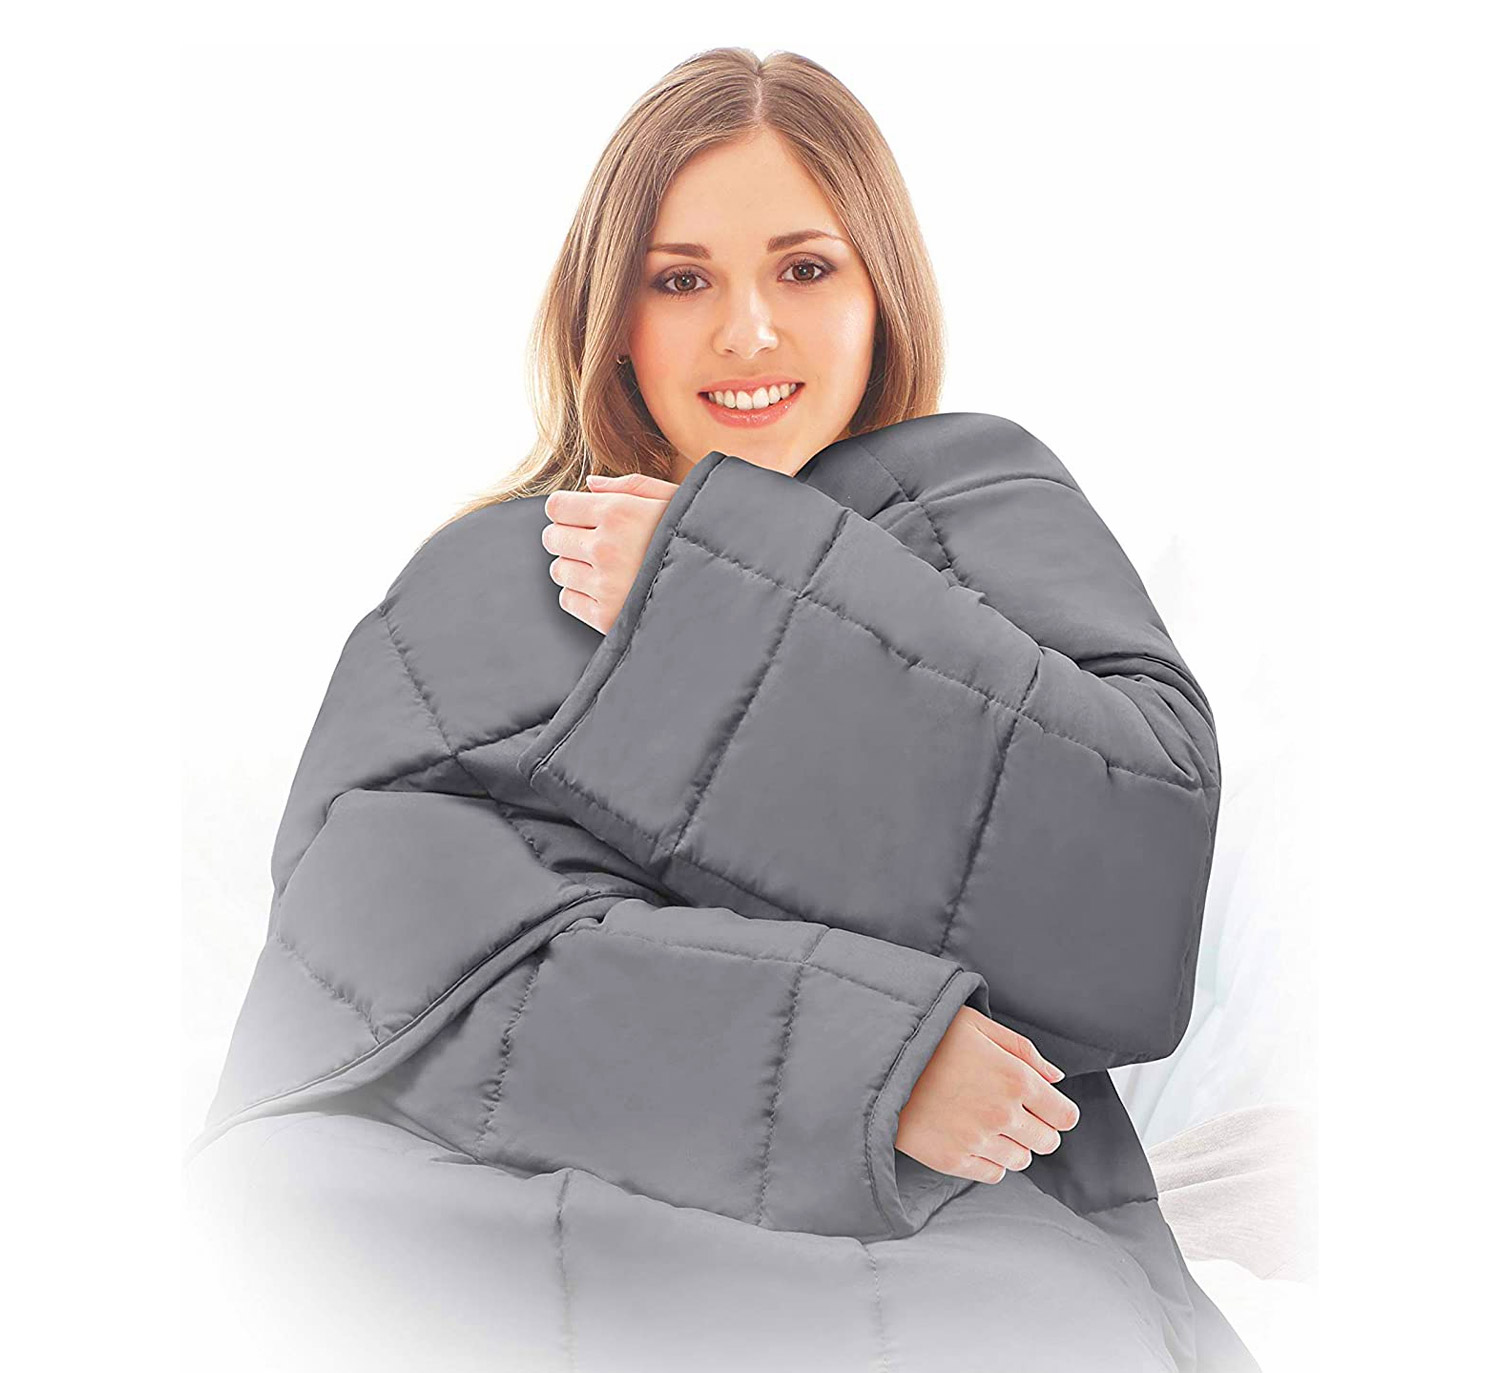 There's Now a Snuggie-Like Weighted Blanket With Sleeves To Calm Your